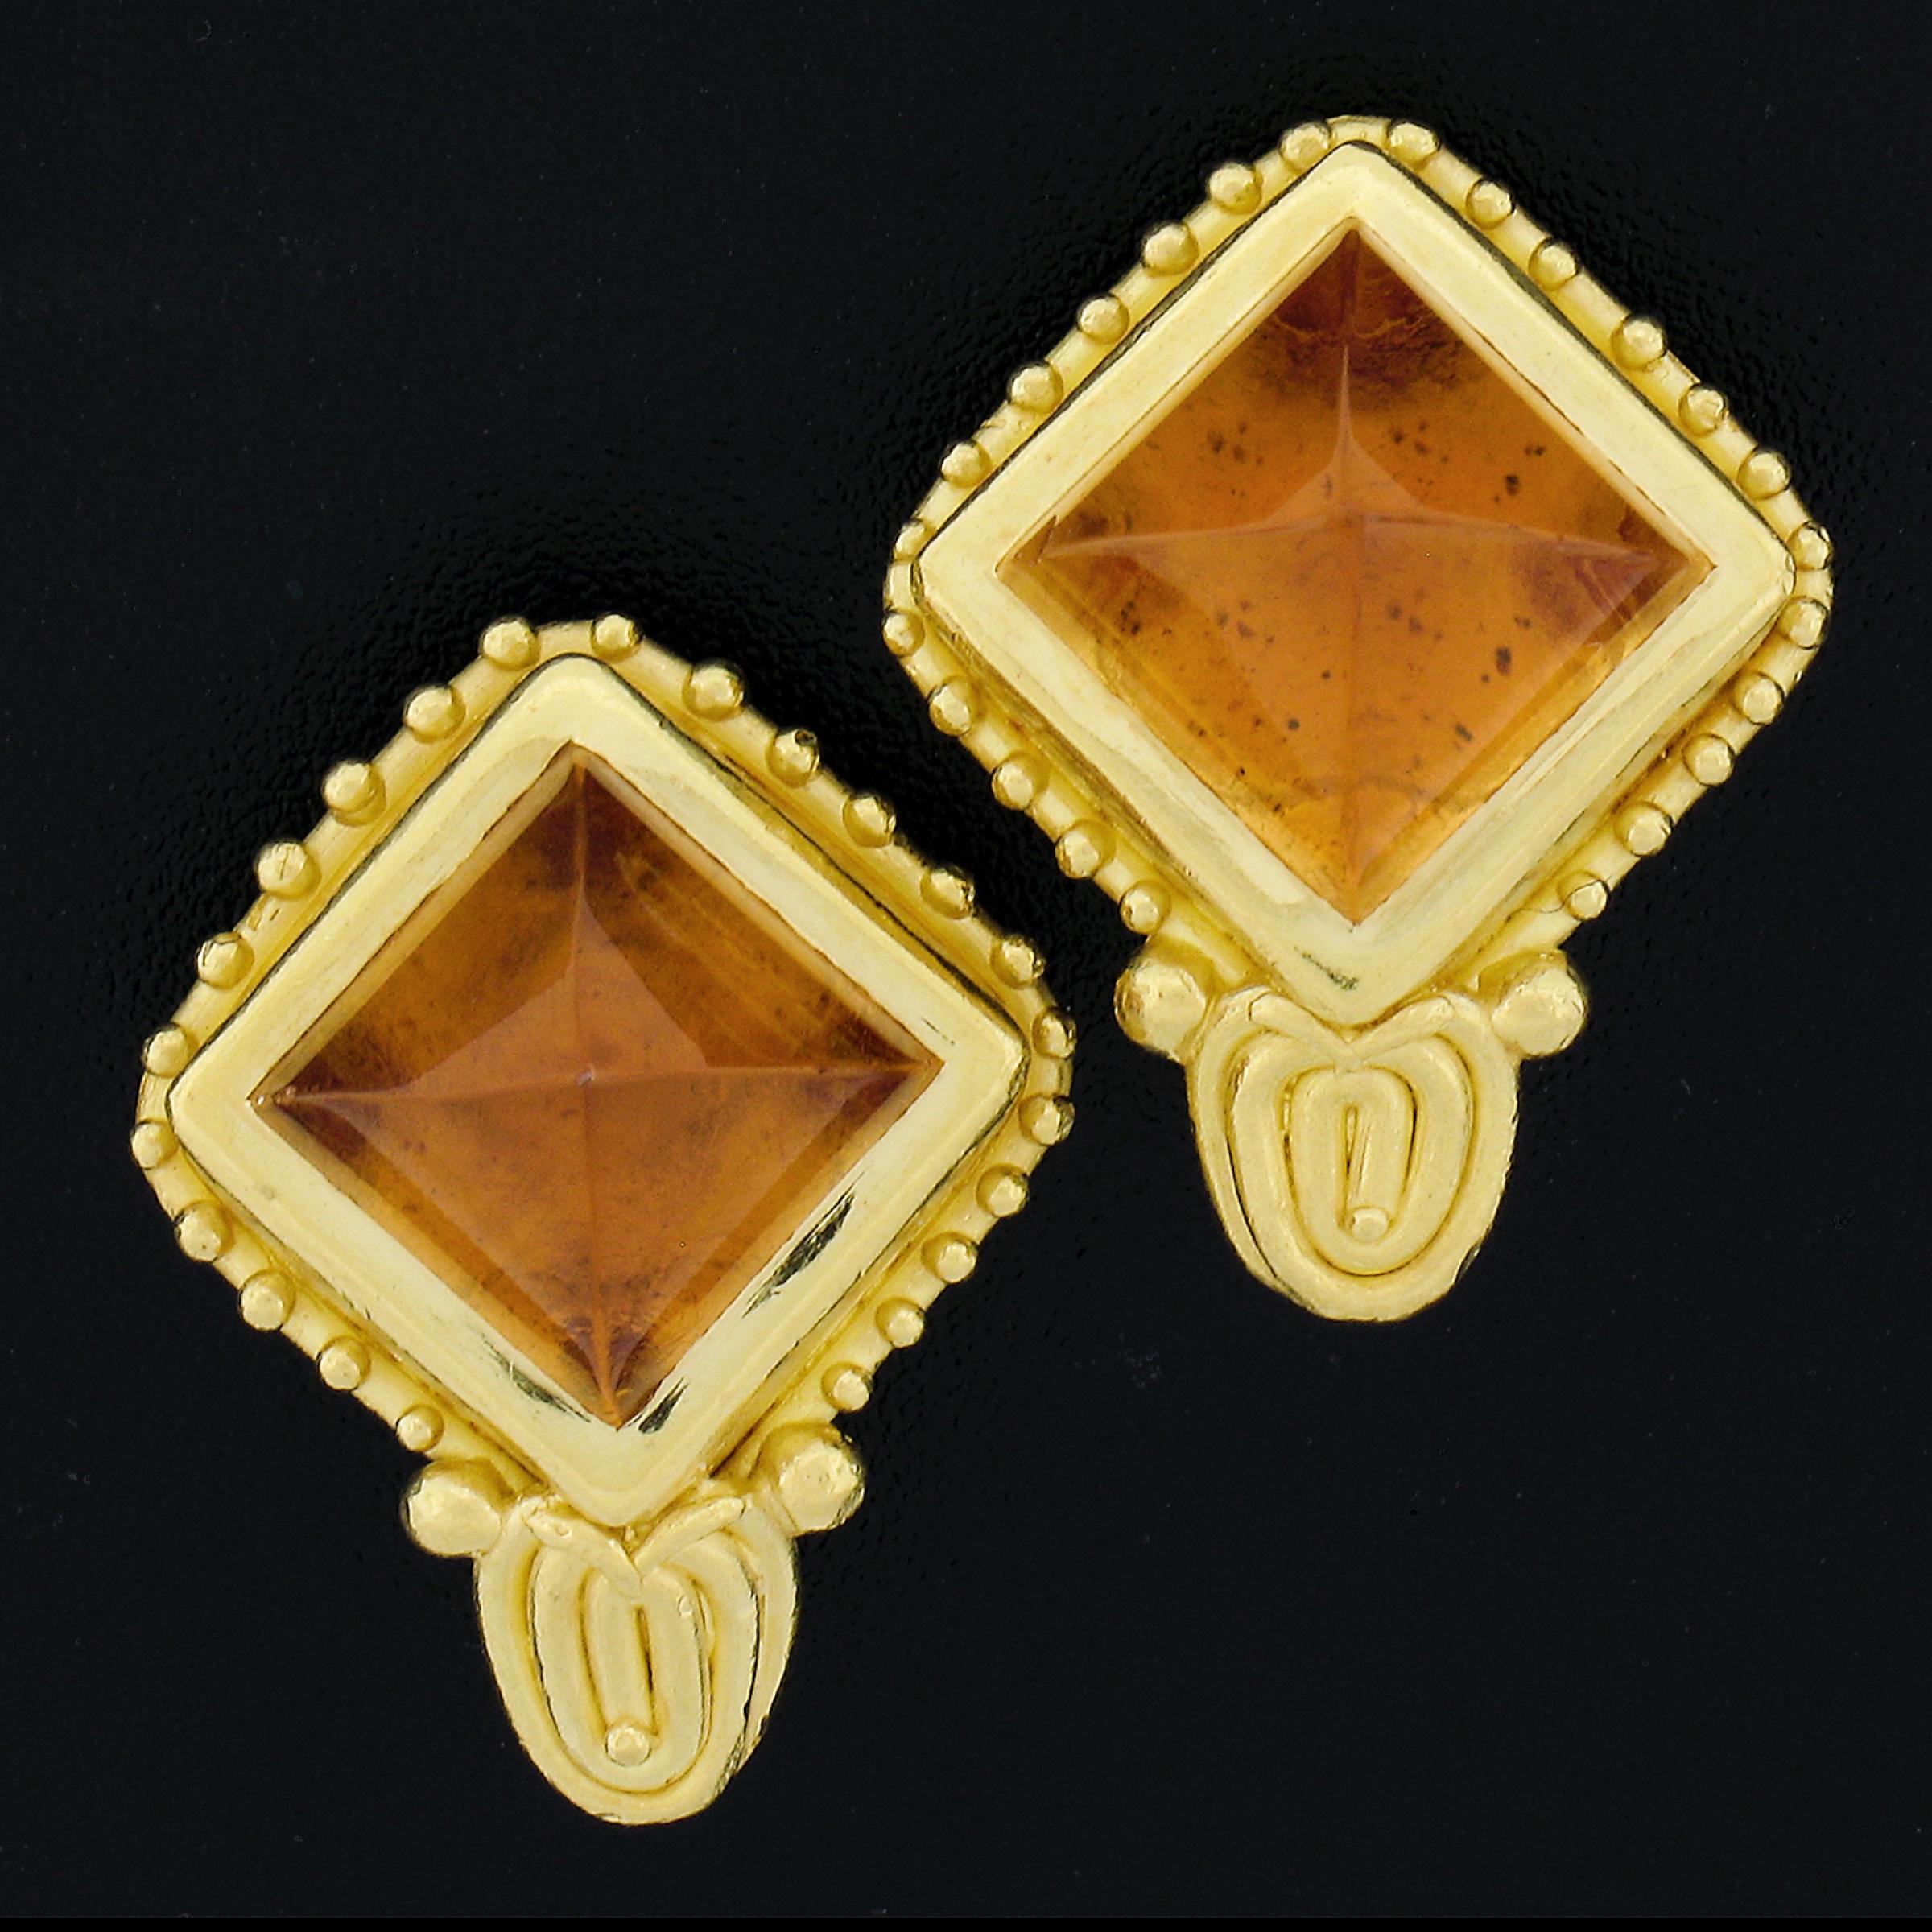 --Stone(s):--
(2) Natural Genuine Citrine - Sugarloaf Cabochon Cut - Bezel Set - Rich Orange Color - 13.4x13.4mm each (approx.)

Material: Solid 22k Yellow Gold Earrings w/ 14K Yellow Gold Backings
Weight: 18.58 Grams
Backing:	Clip On Omega Closures